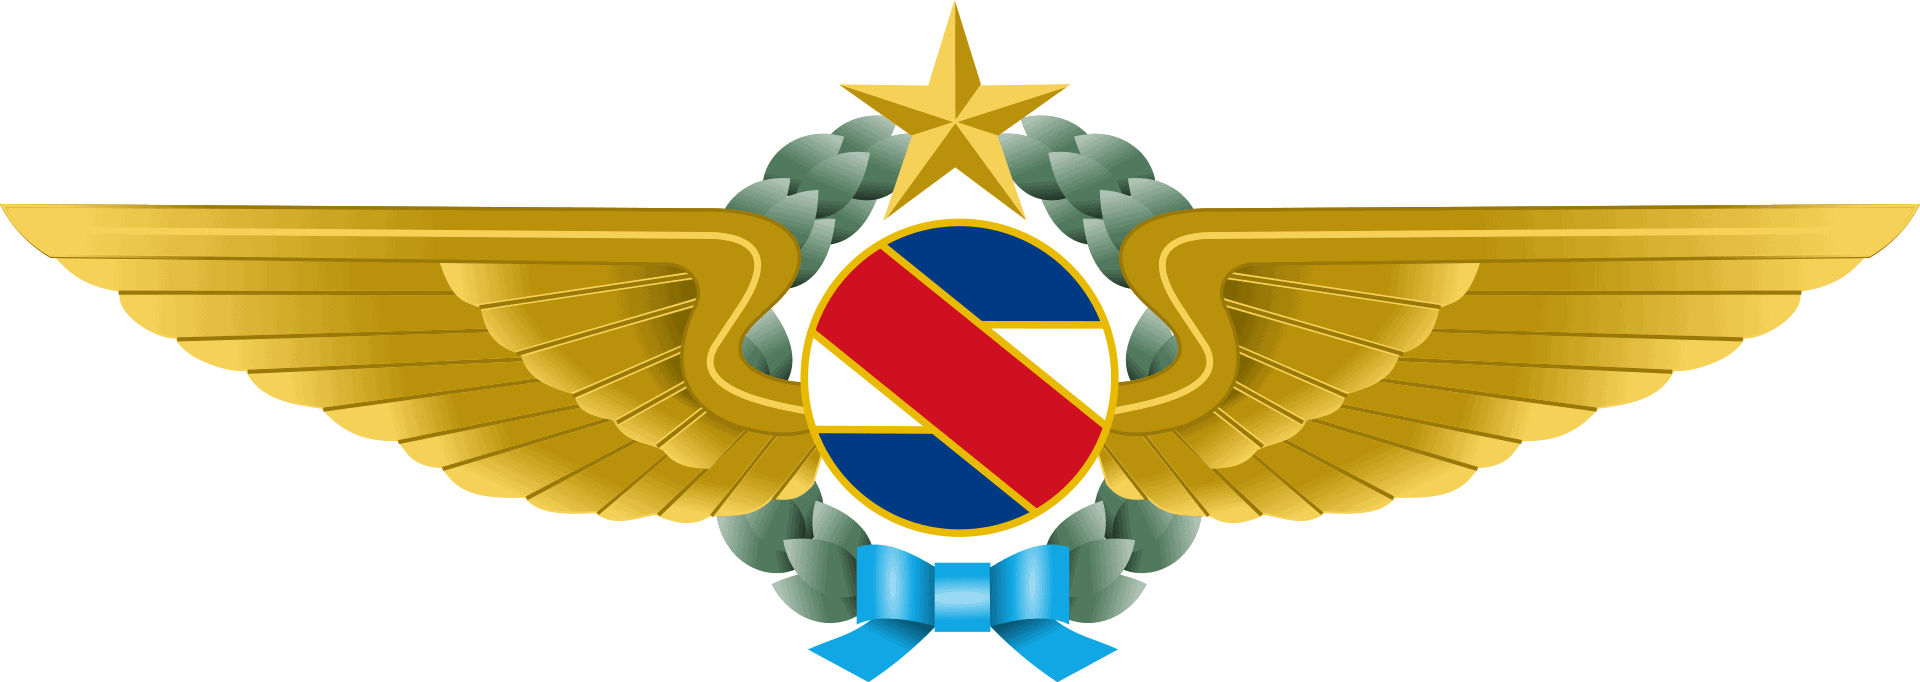 Air Force of Uruguay